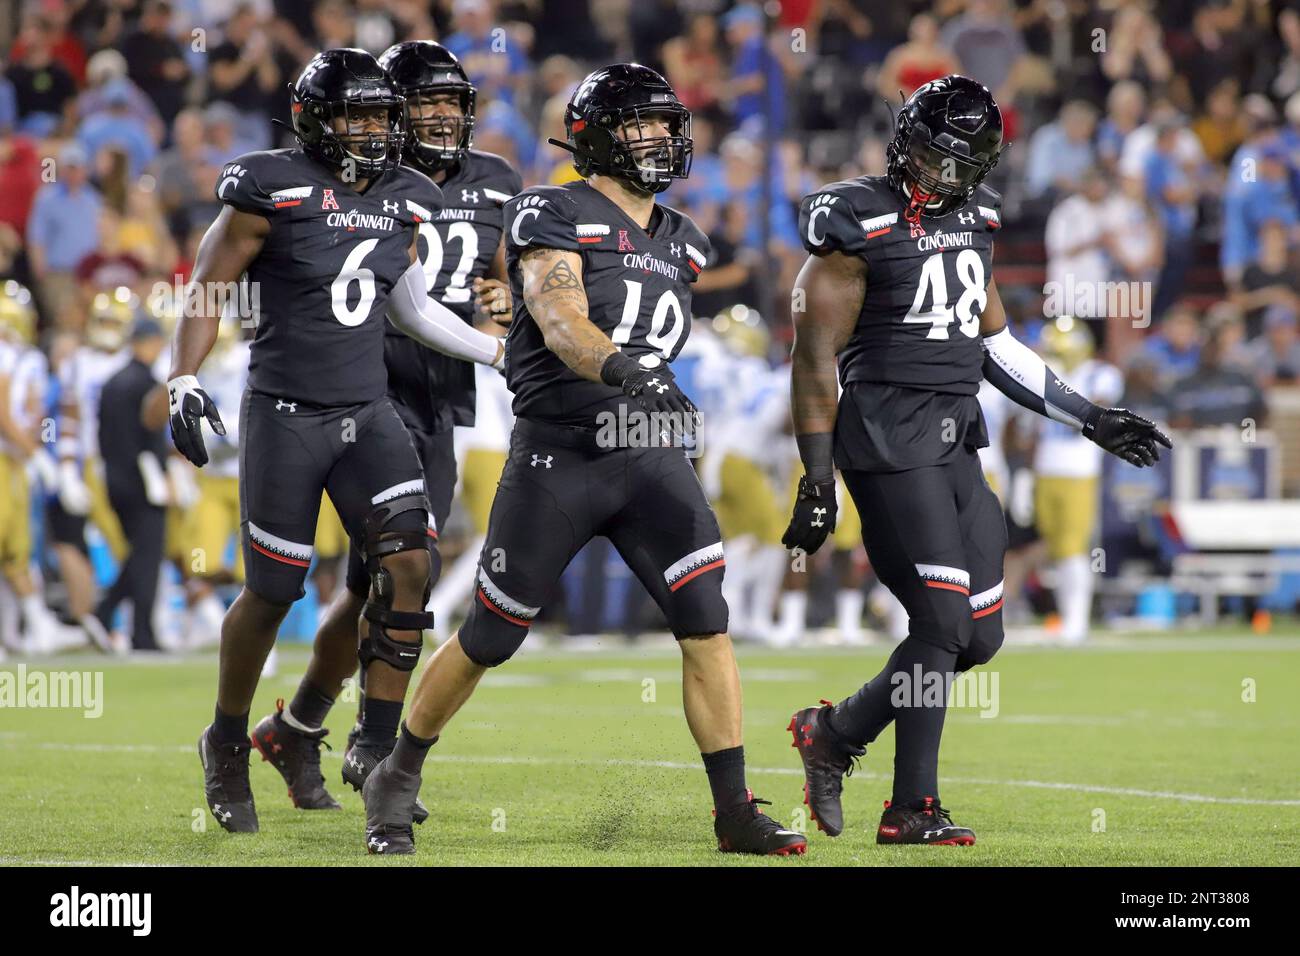 August 29, 2019: Cincinnati's Ethan Tucky (19) struts to celebrate his sack with teammates Perry Young (6) and Kevin Mouhon (48) during an NCAA football game between the Cincinnati Bearcats and the UCLA Bruins at Nippert Stadium in Cincinnati, Ohio. Kevin Schultz/CSM(Credit Image: © Kevin Schultz/CSM via ZUMA Wire) (Cal Sport Media via AP Images) Foto Stock